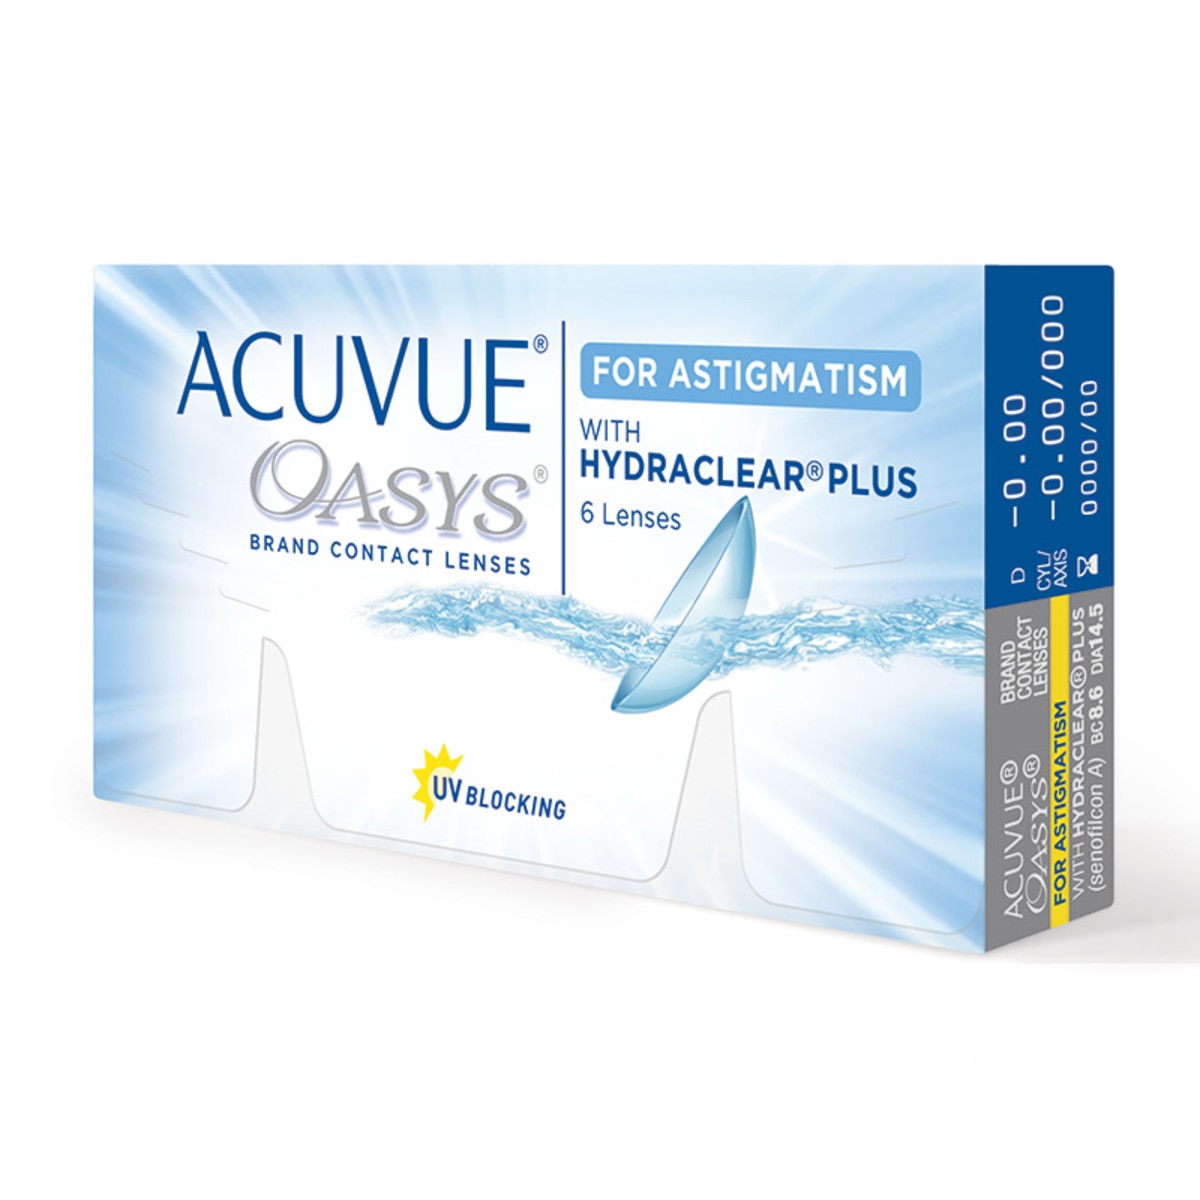 ACUVUE OASYS® con HYDRACLEAR Plus® para Astigmatismo (D -3.25, Cyl/Axis -2.25/20)